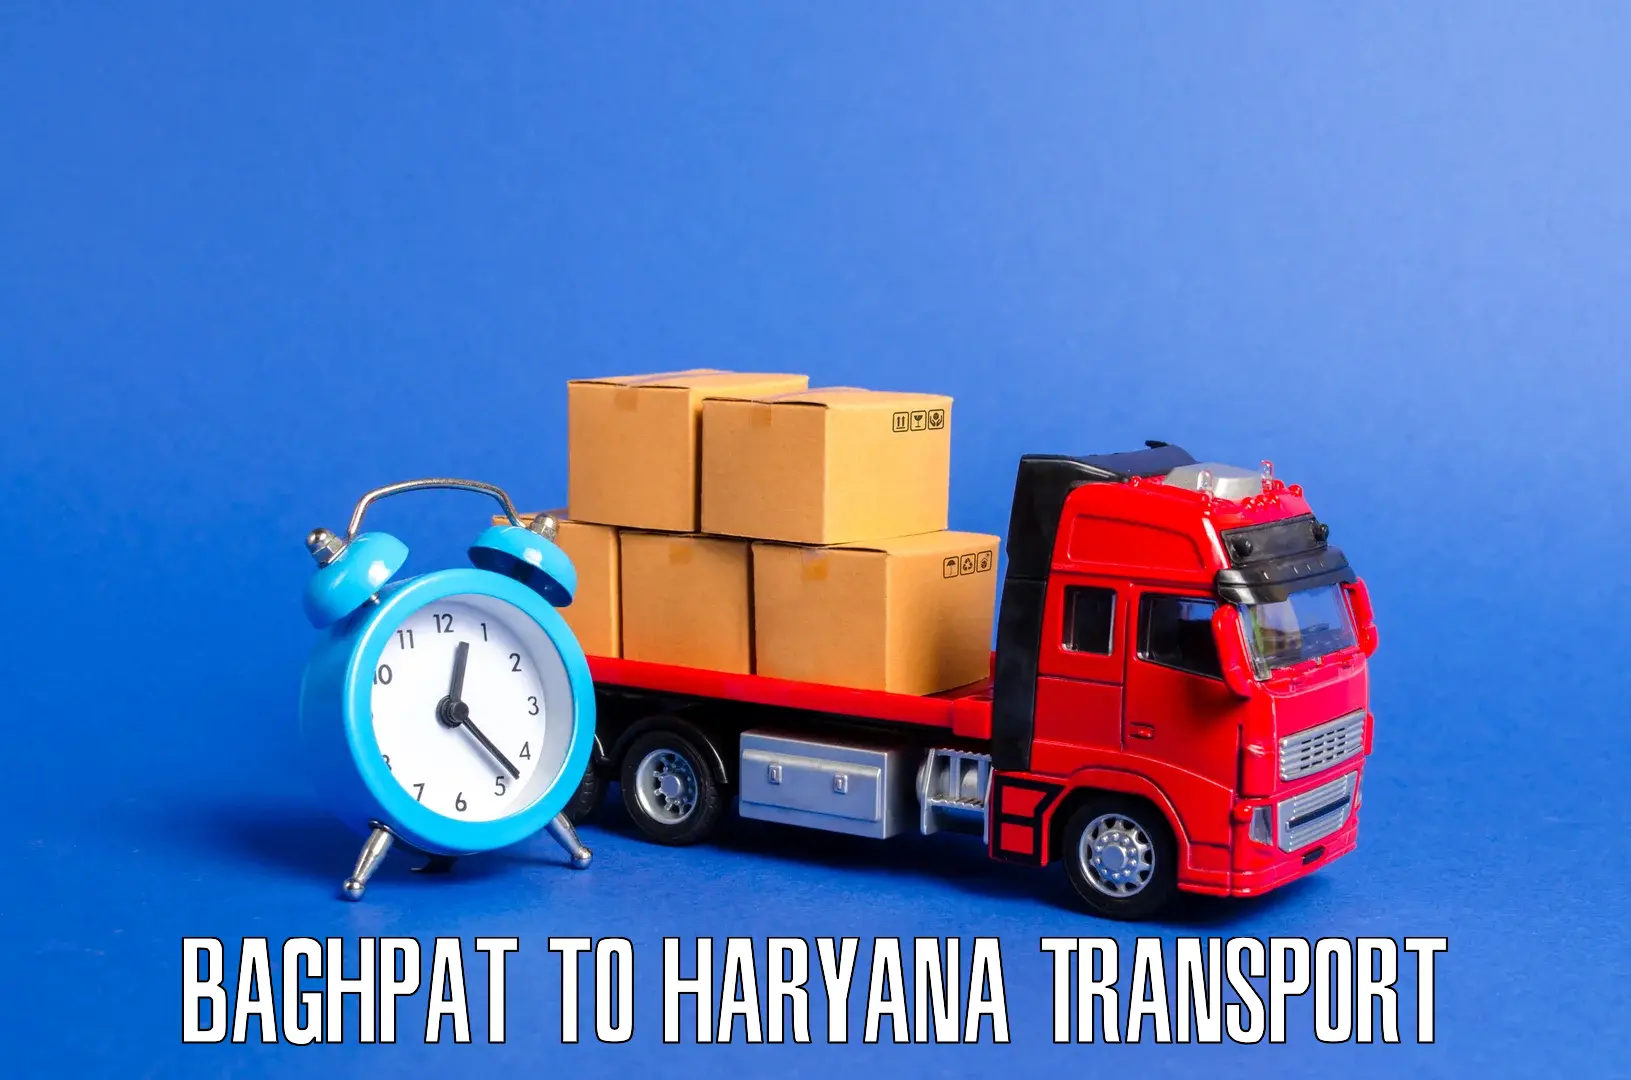 Vehicle transport services Baghpat to Fatehabad